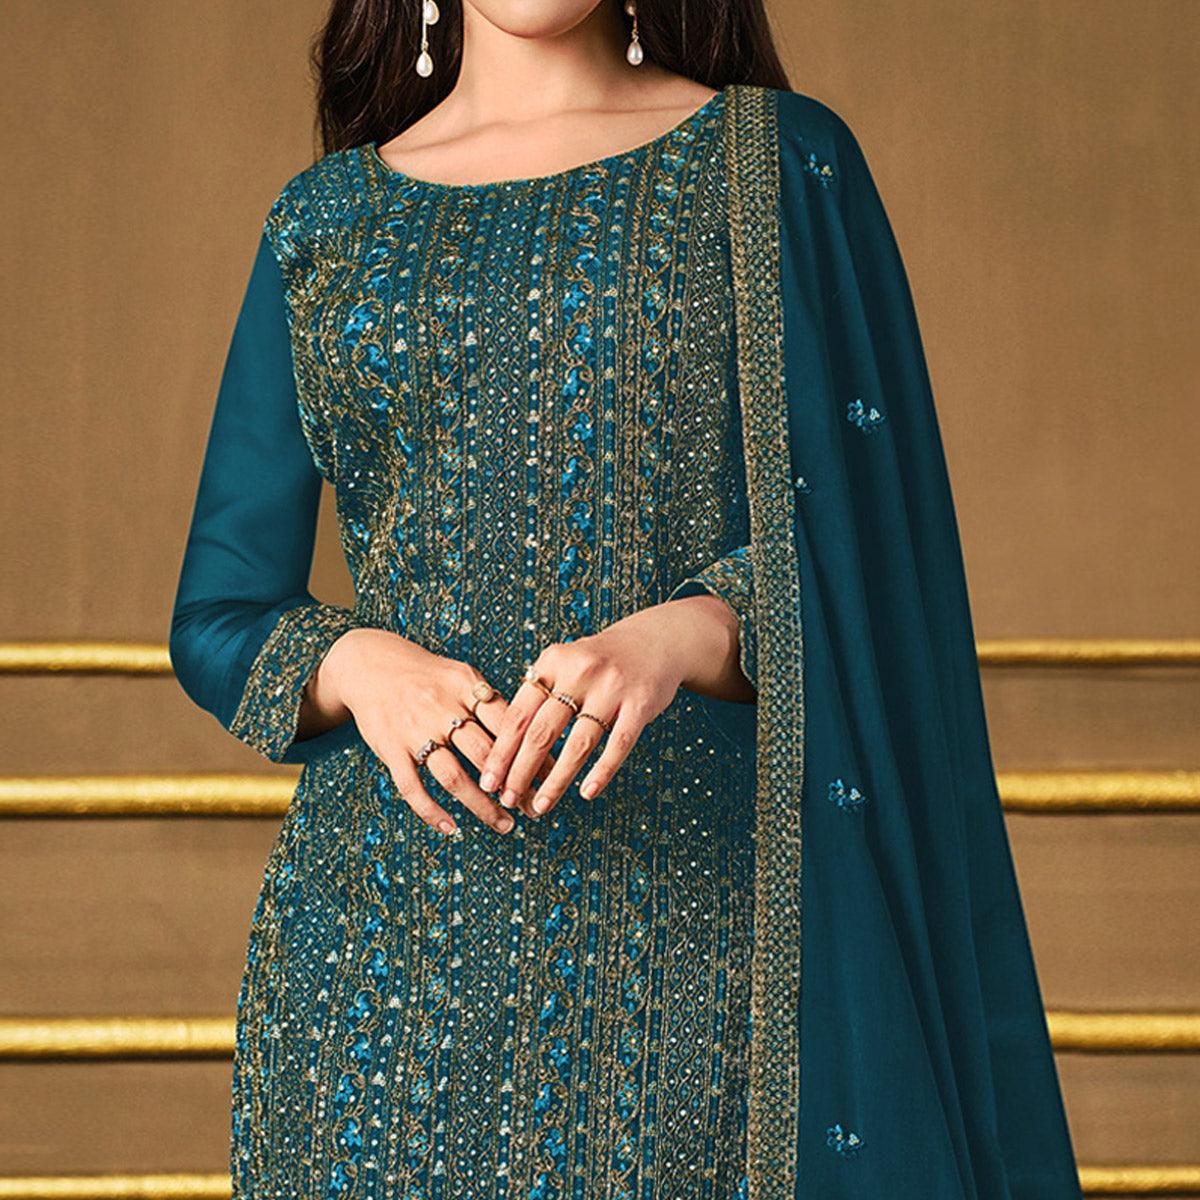 Teal Blue Embroidered Georgette Suit - Peachmode